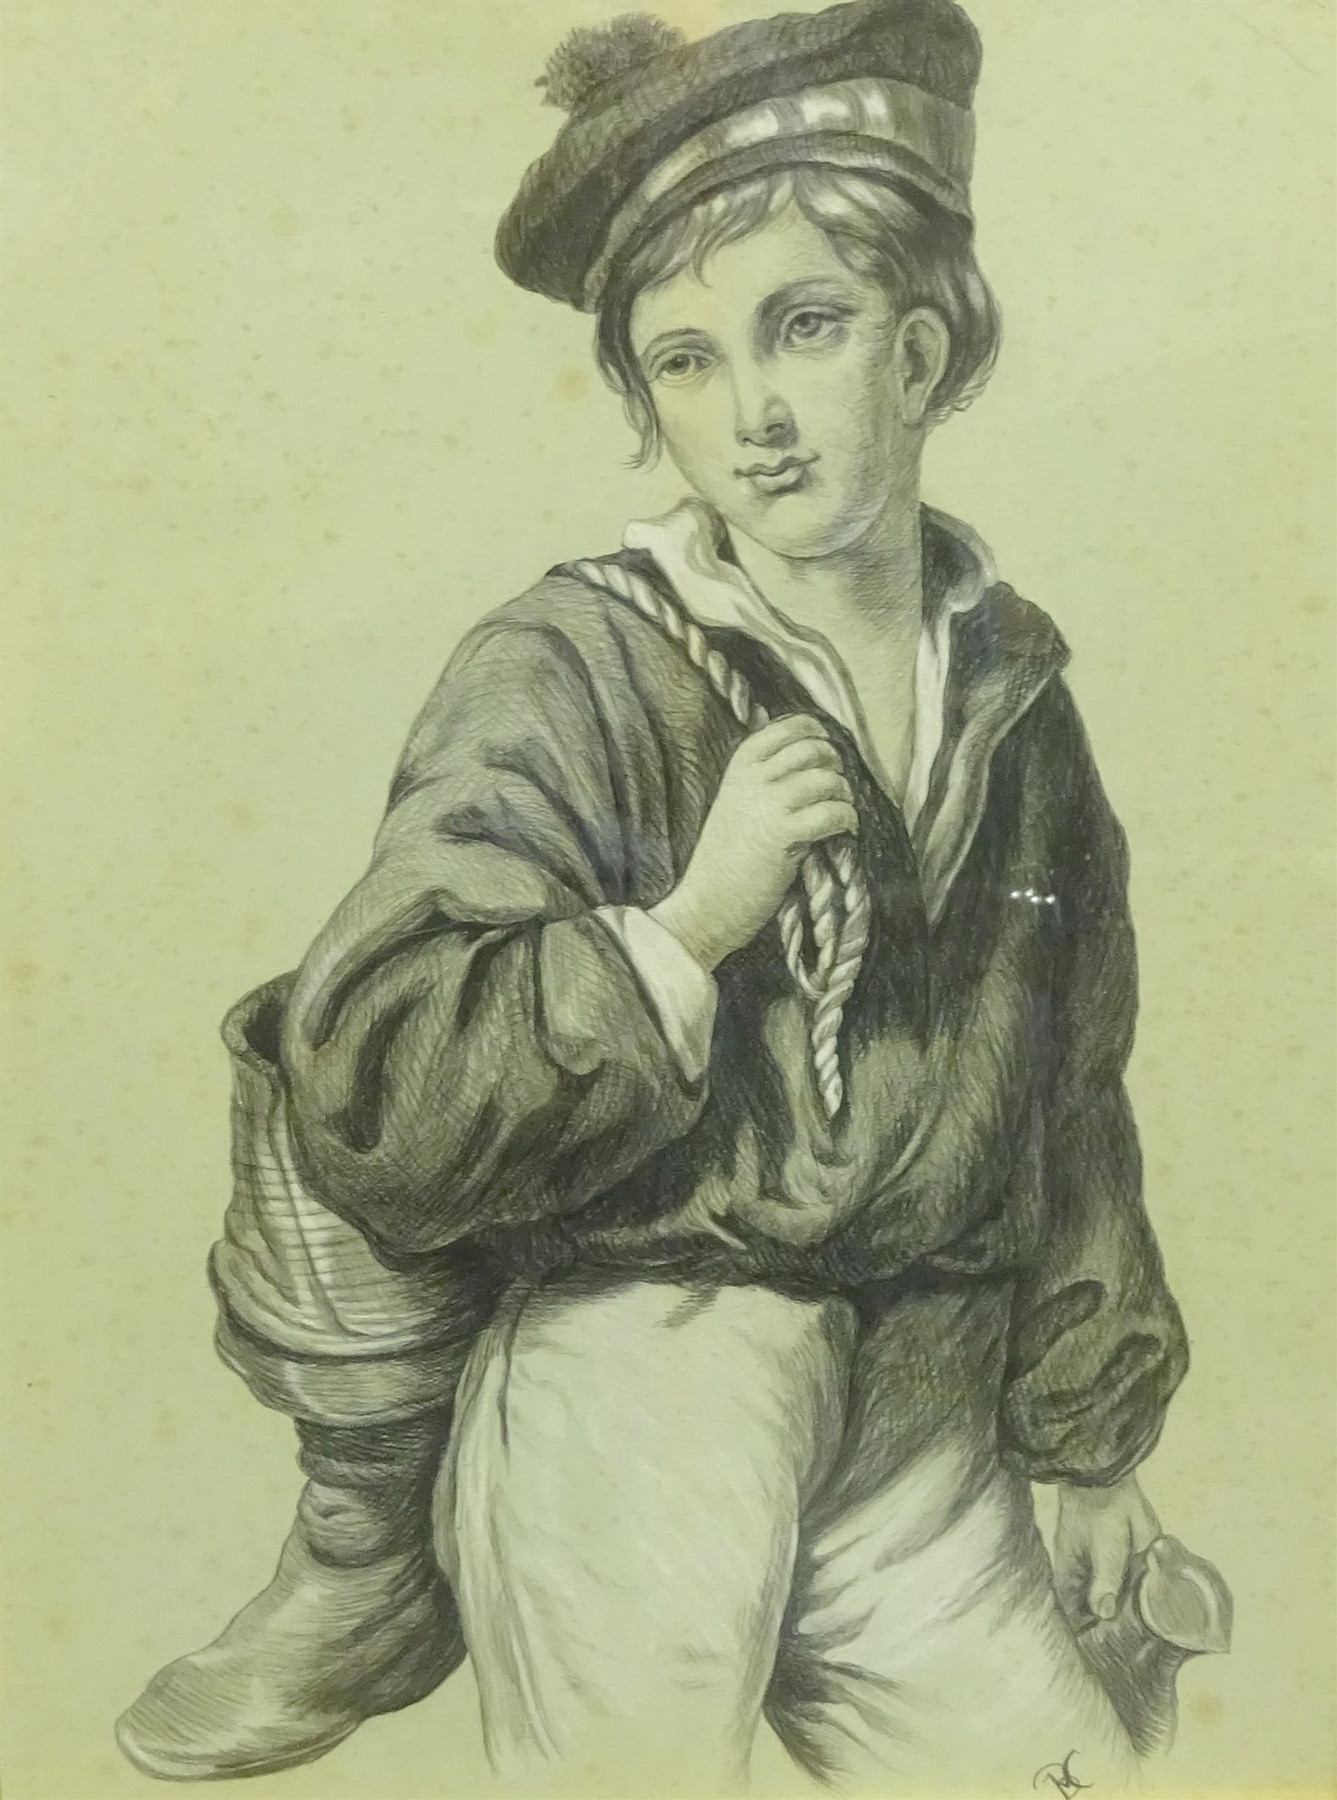 Illustration of a young person in a sailor suit